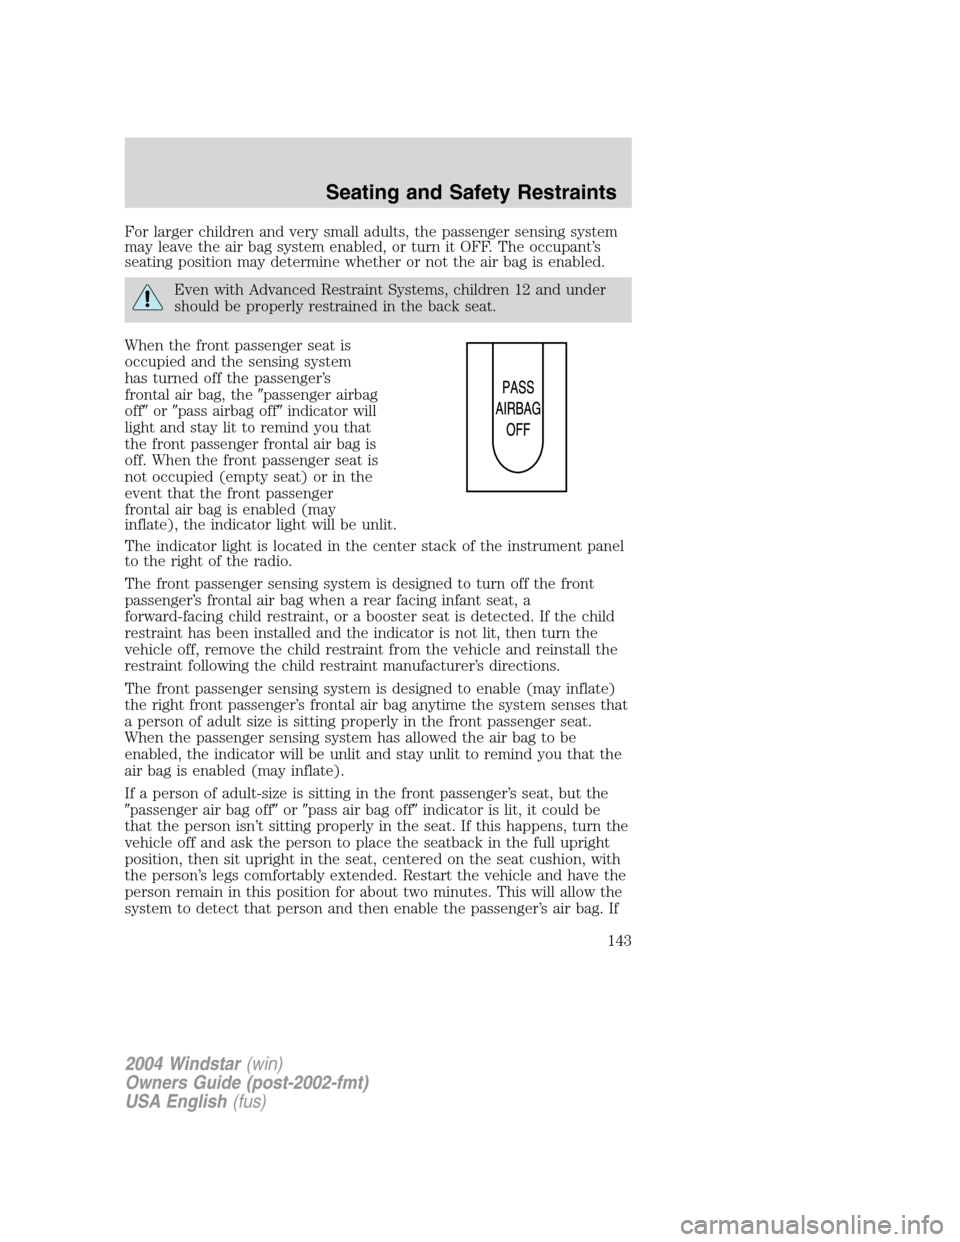 FORD FREESTAR 2004 1.G Owners Manual For larger children and very small adults, the passenger sensing system
may leave the air bag system enabled, or turn it OFF. The occupant’s
seating position may determine whether or not the air bag